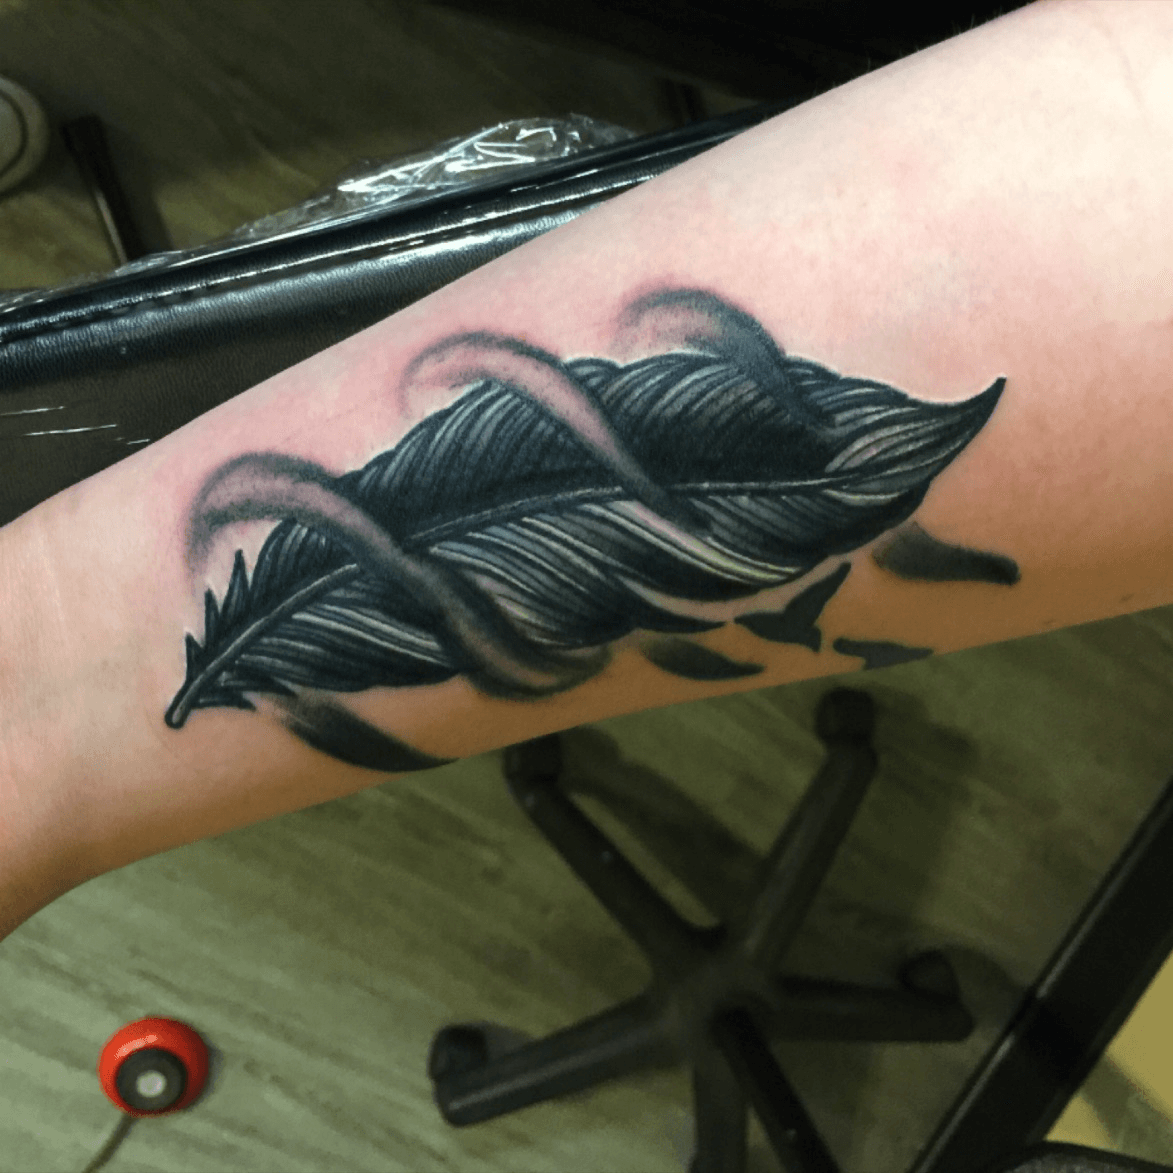 Great White Tattoo Studio on Instagram Strong lines bold shading  bendelucatattoo knows how to make a tattoo  greatwhitetattoostudio  kirrawee sydney traditonaltattoo